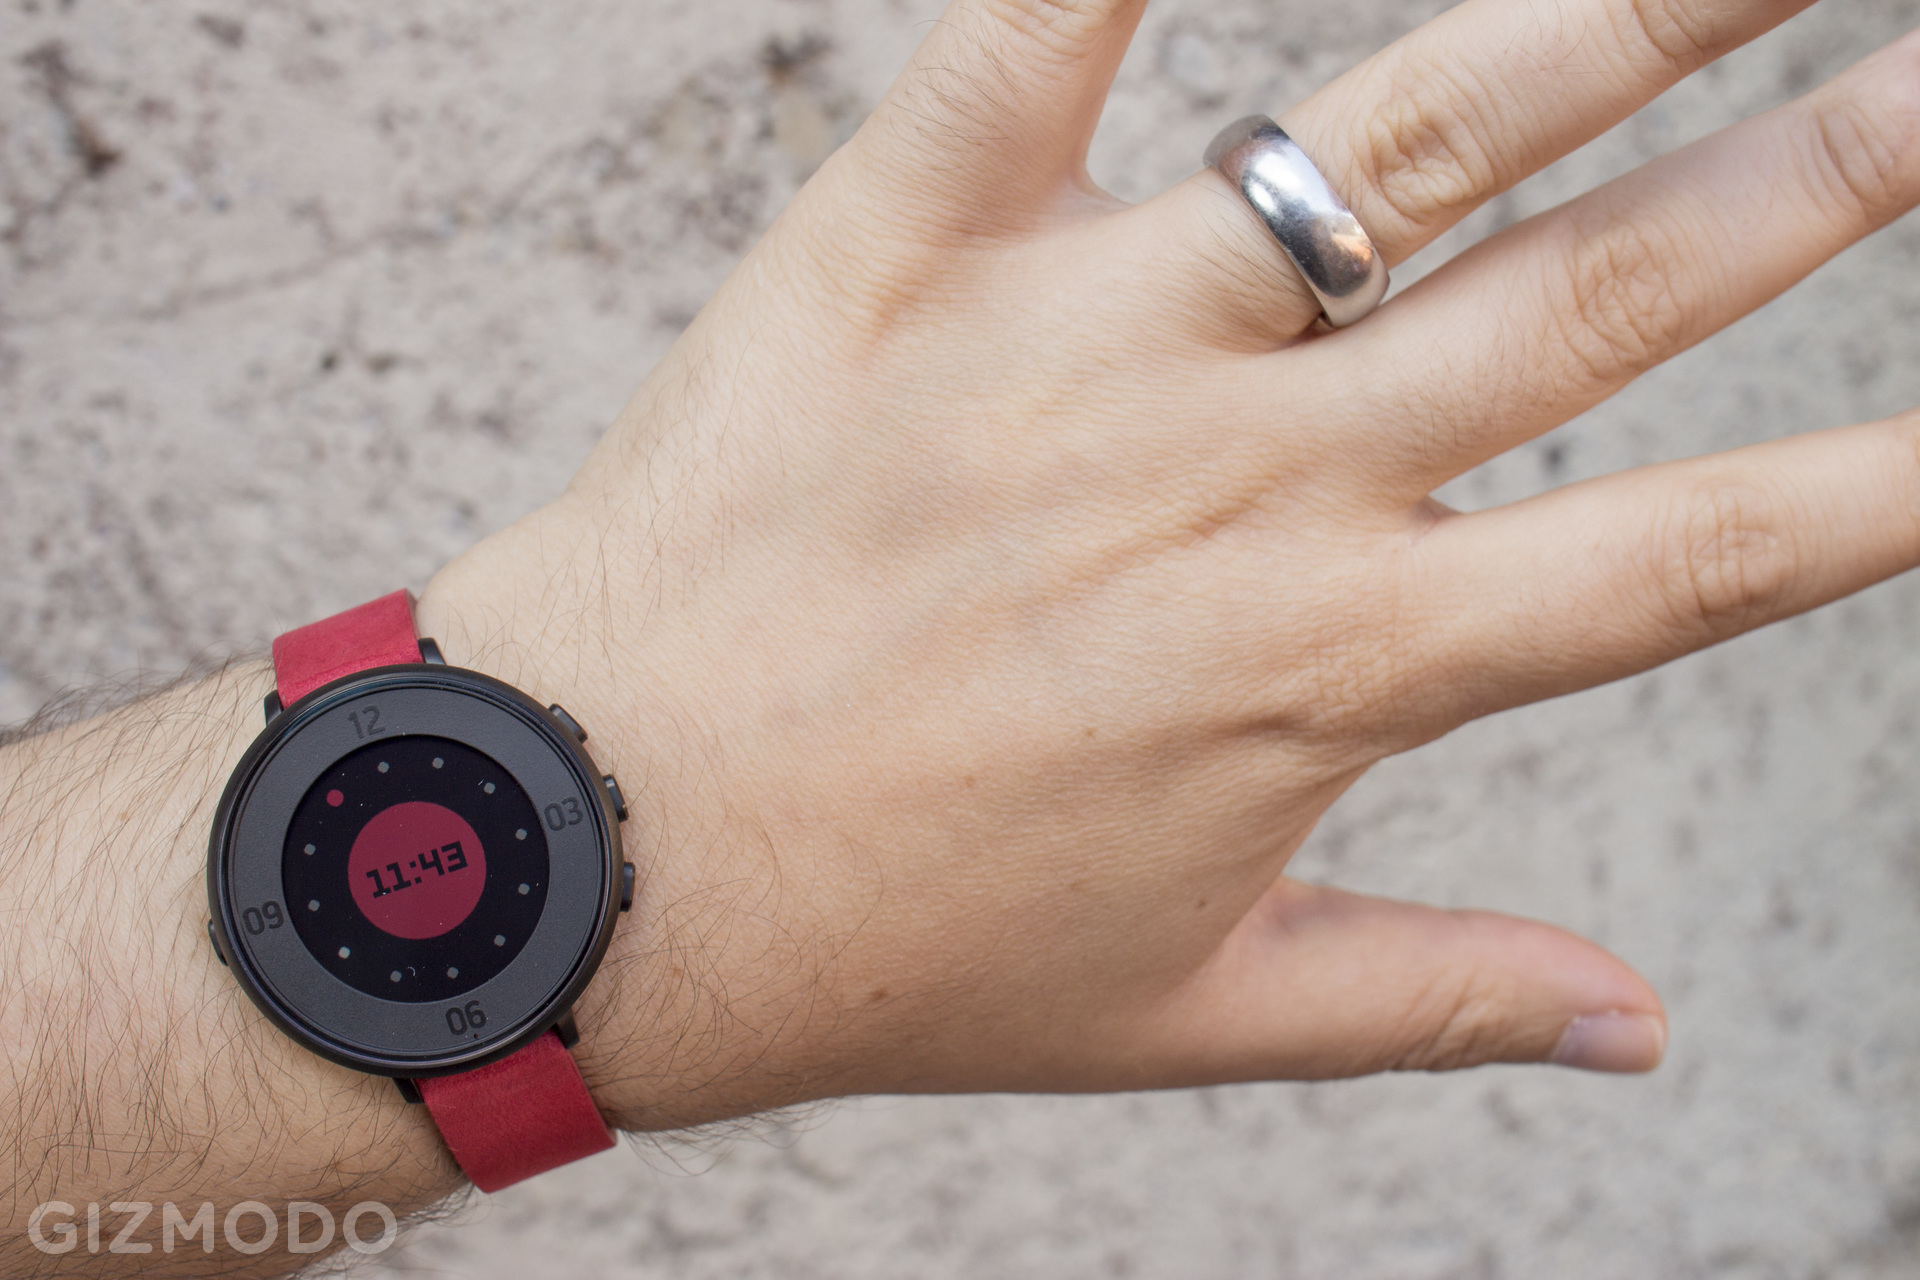 Pebble Time Round Hands On: A Smartwatch For People Who Don’t Like Smartwatches